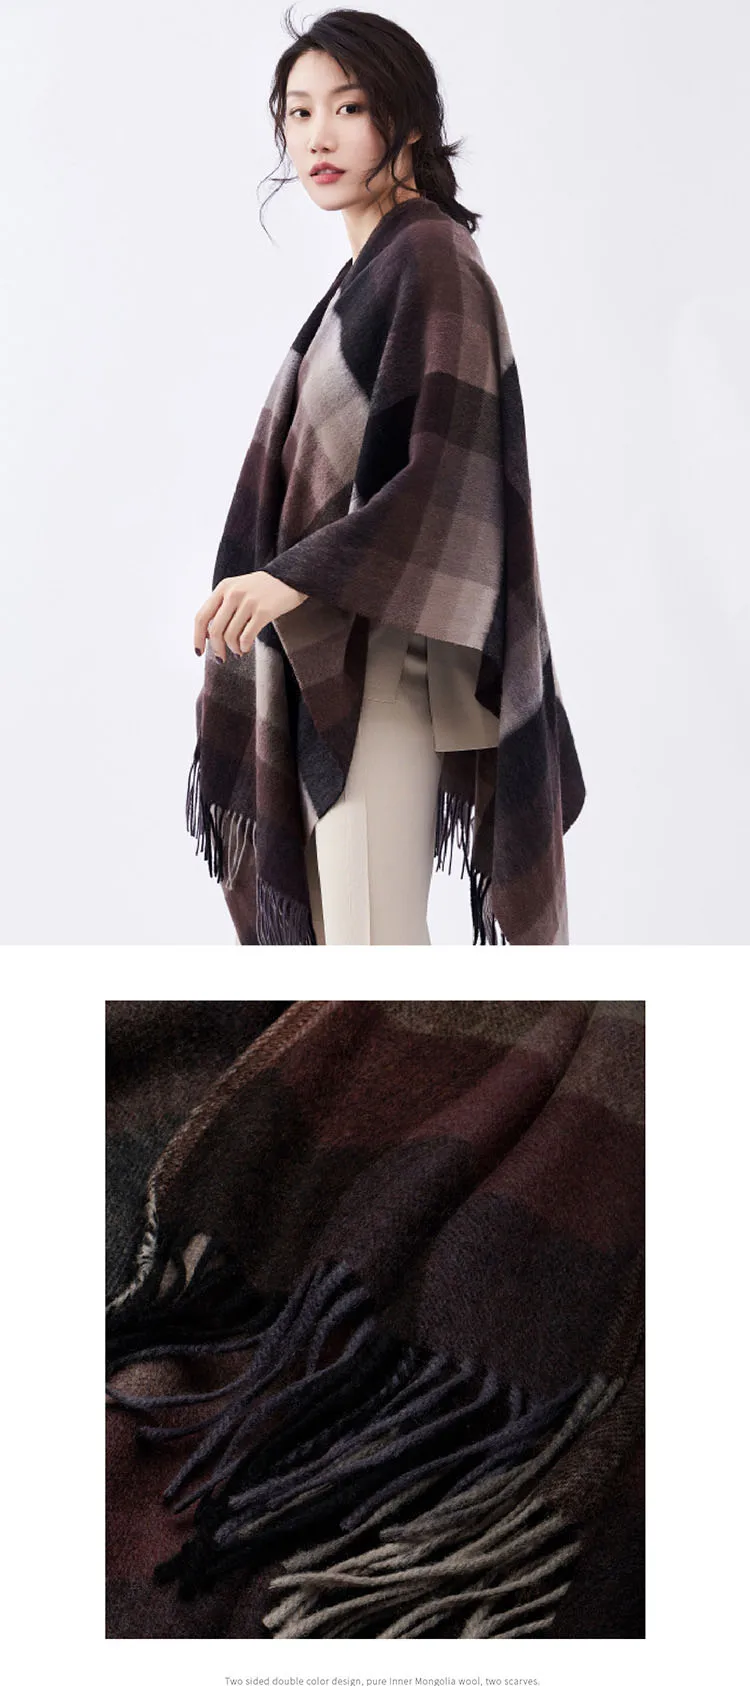 CAVME Pure Wool Pashmina Scarf Stole Plaid Shawl with Tassels for Women Ladies Large Scarf 130*170cm CUSTOM LETTERS